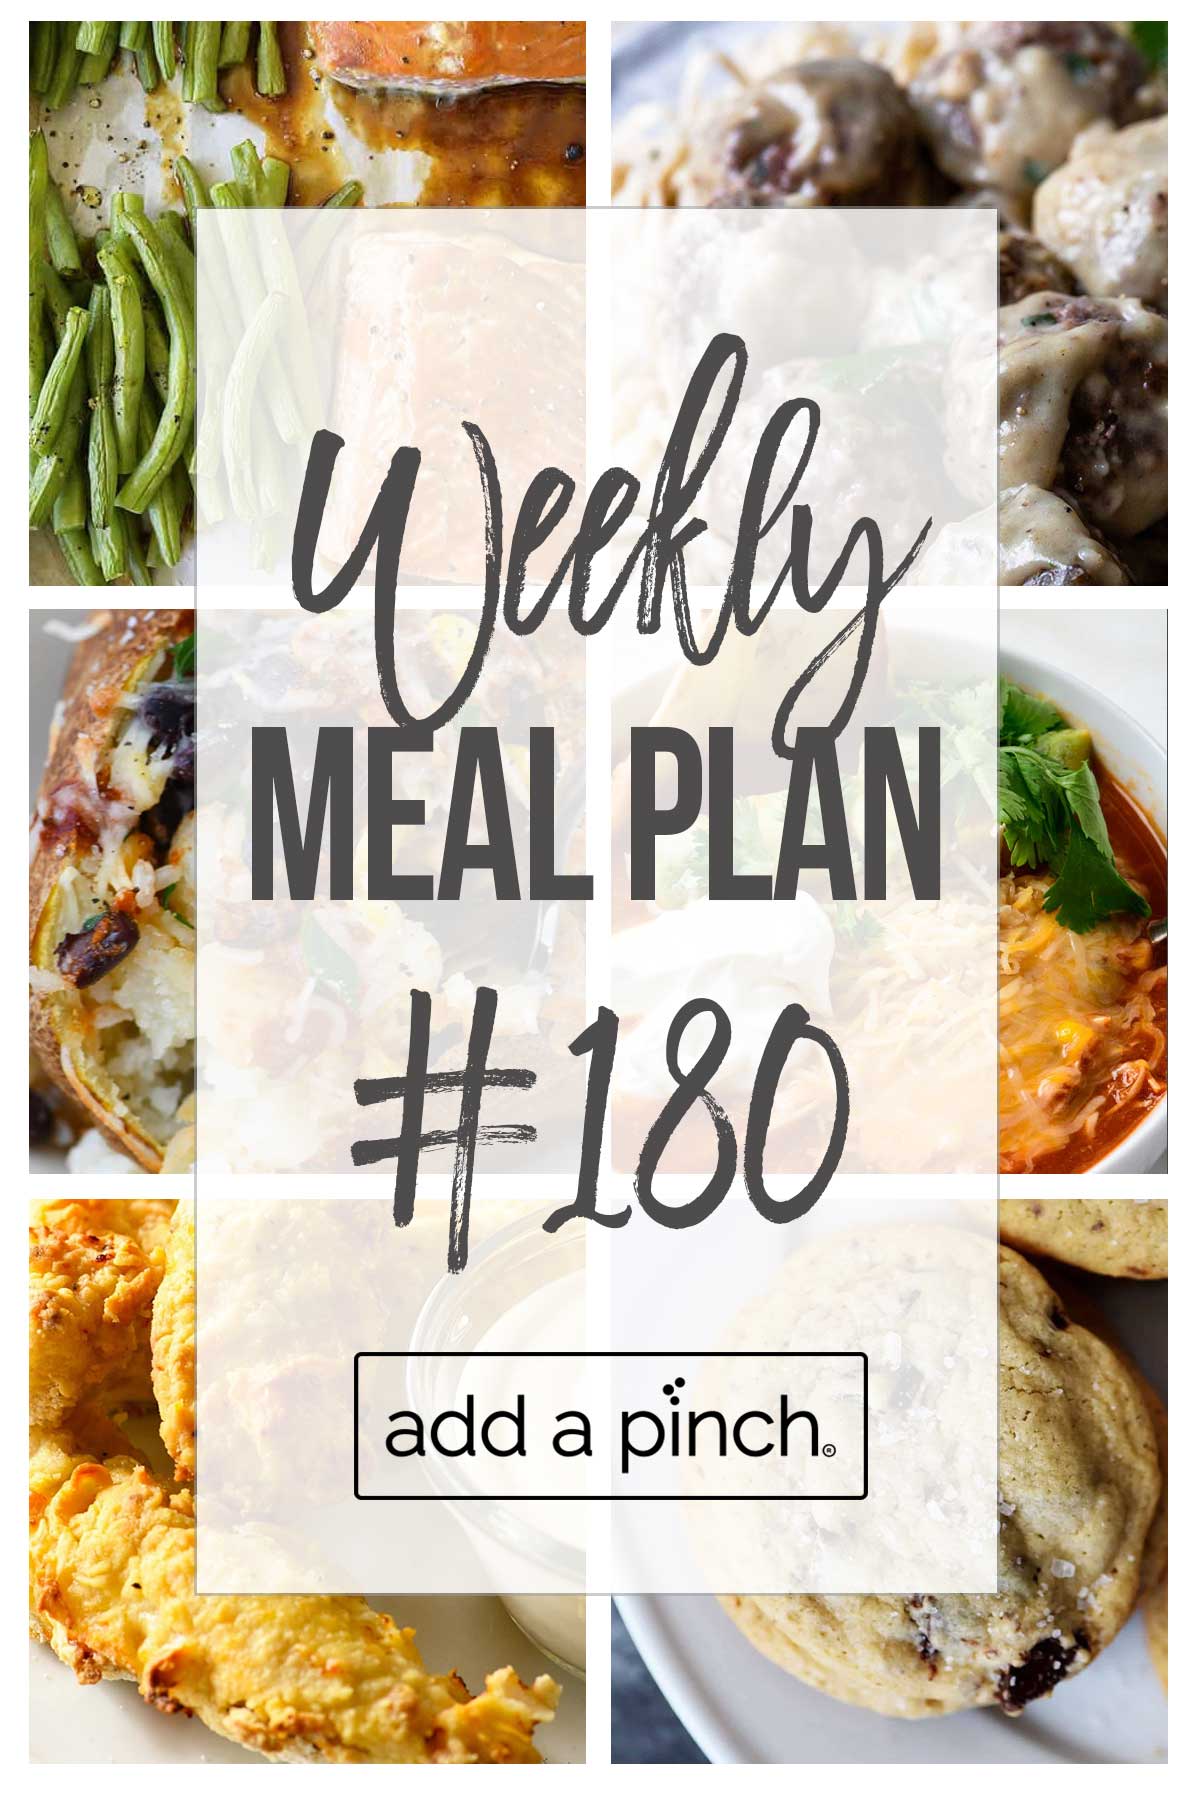 Graphic for weekly meal plan #180. 